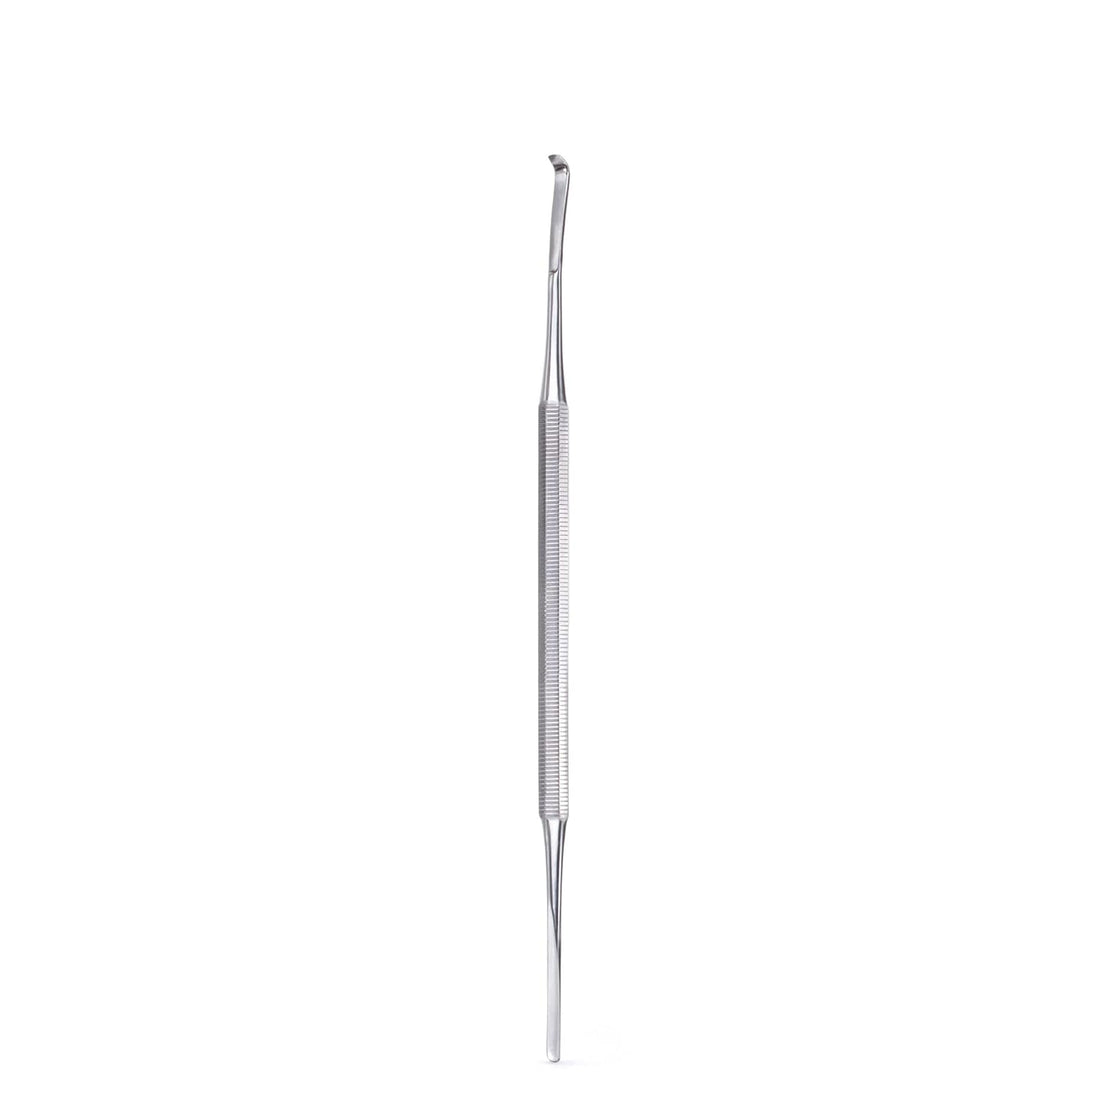 Rounded Double Spatula Implement for Ingrown Toenails